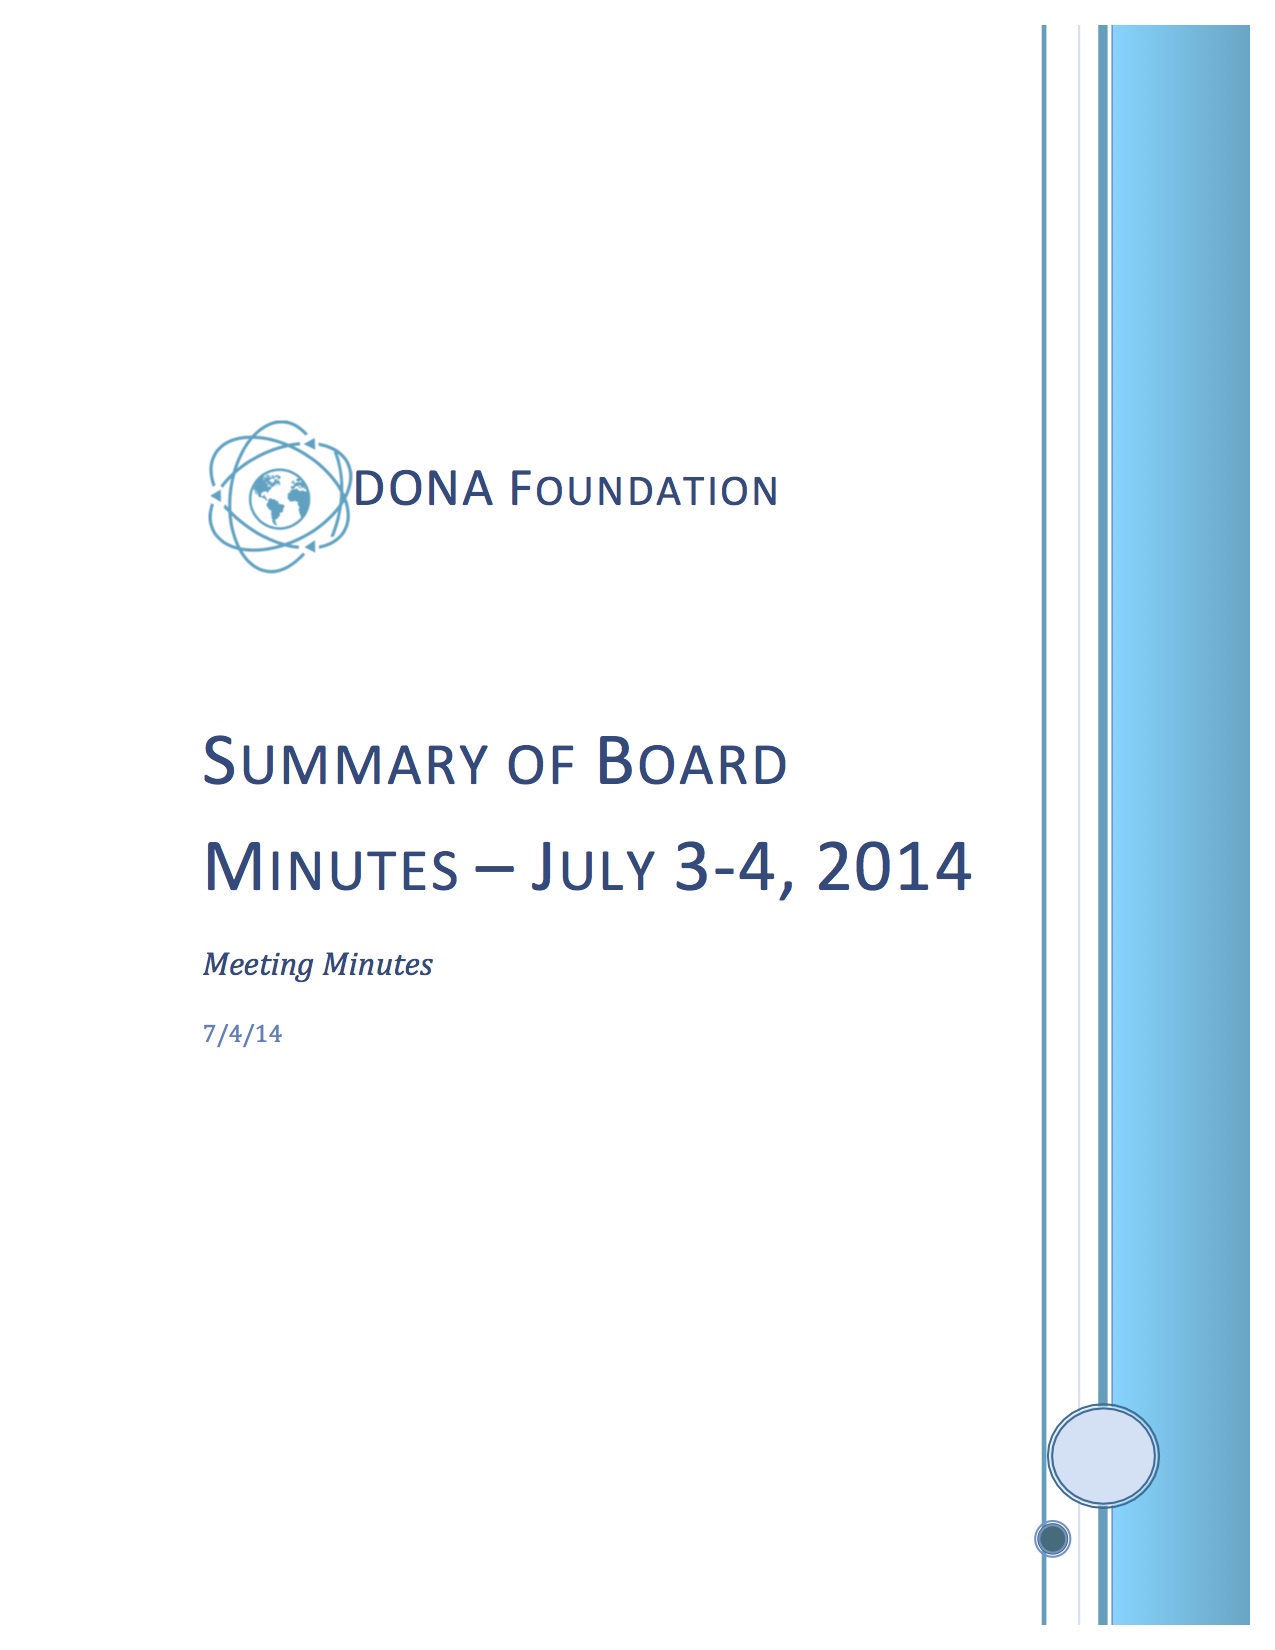 Summary of Board Minutes July 3-4, 2014